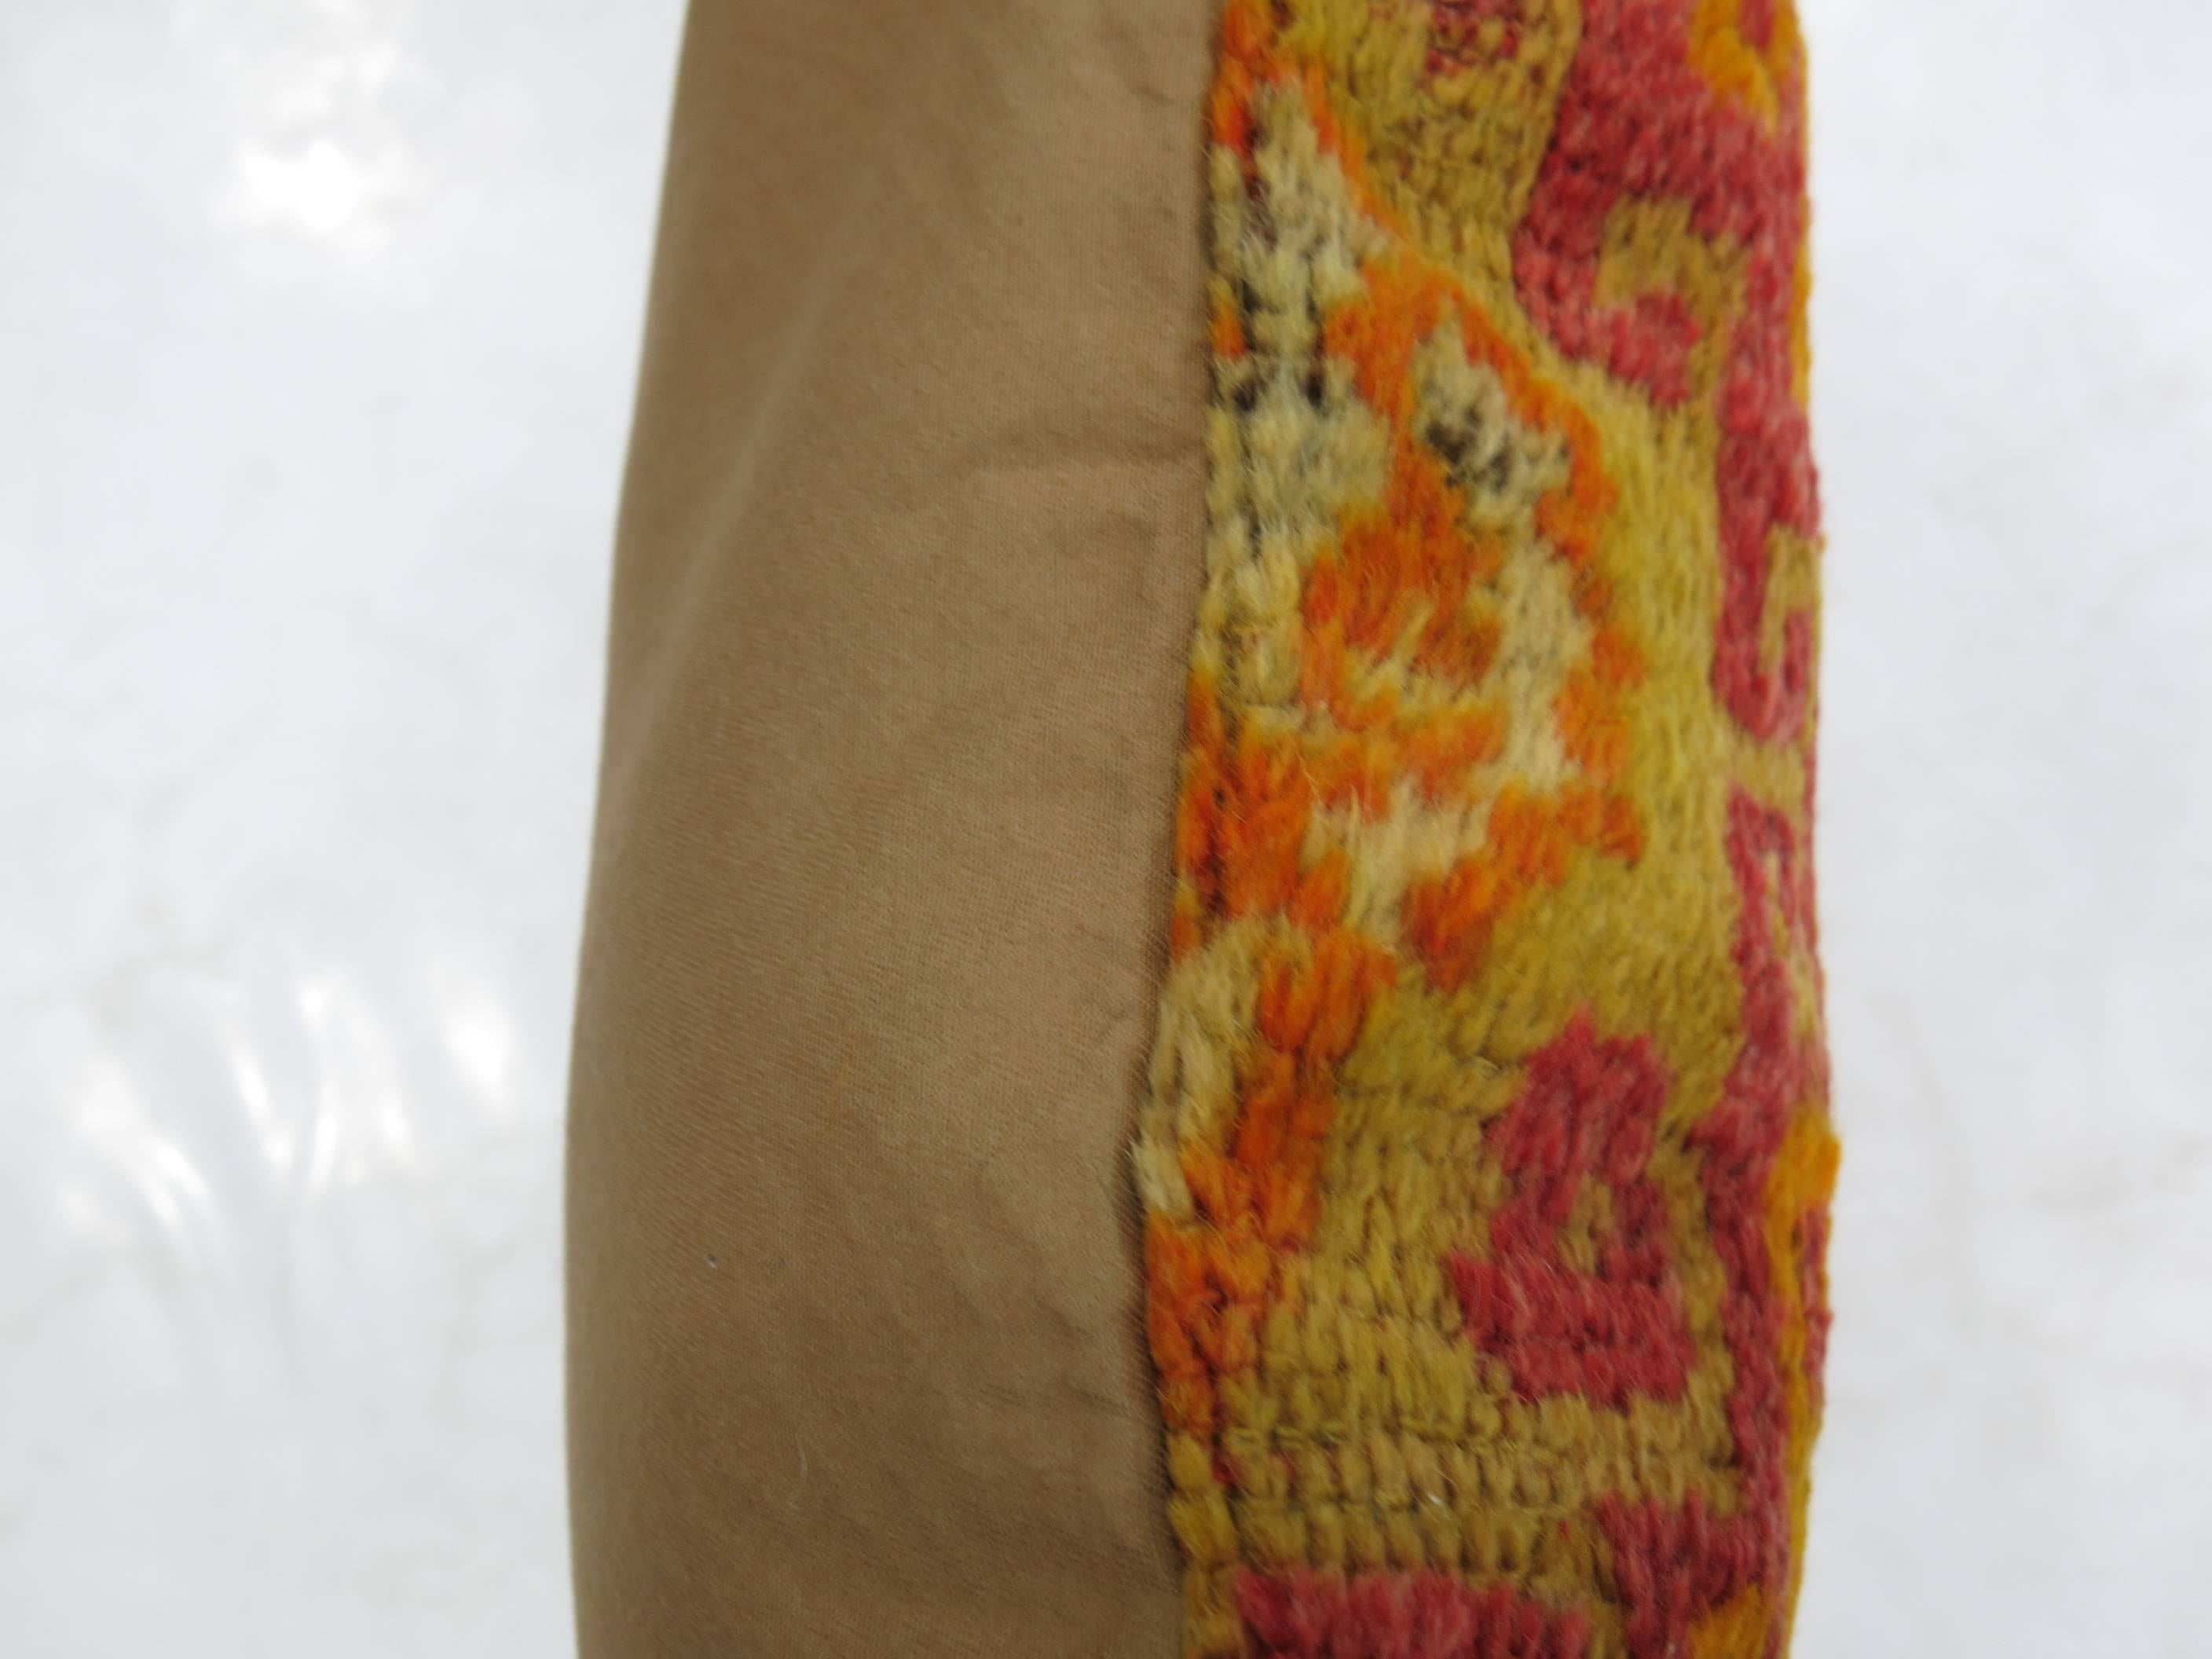 Pillow made from a vintage Turkish rug in bright red and orange accents.

12'' x 24''